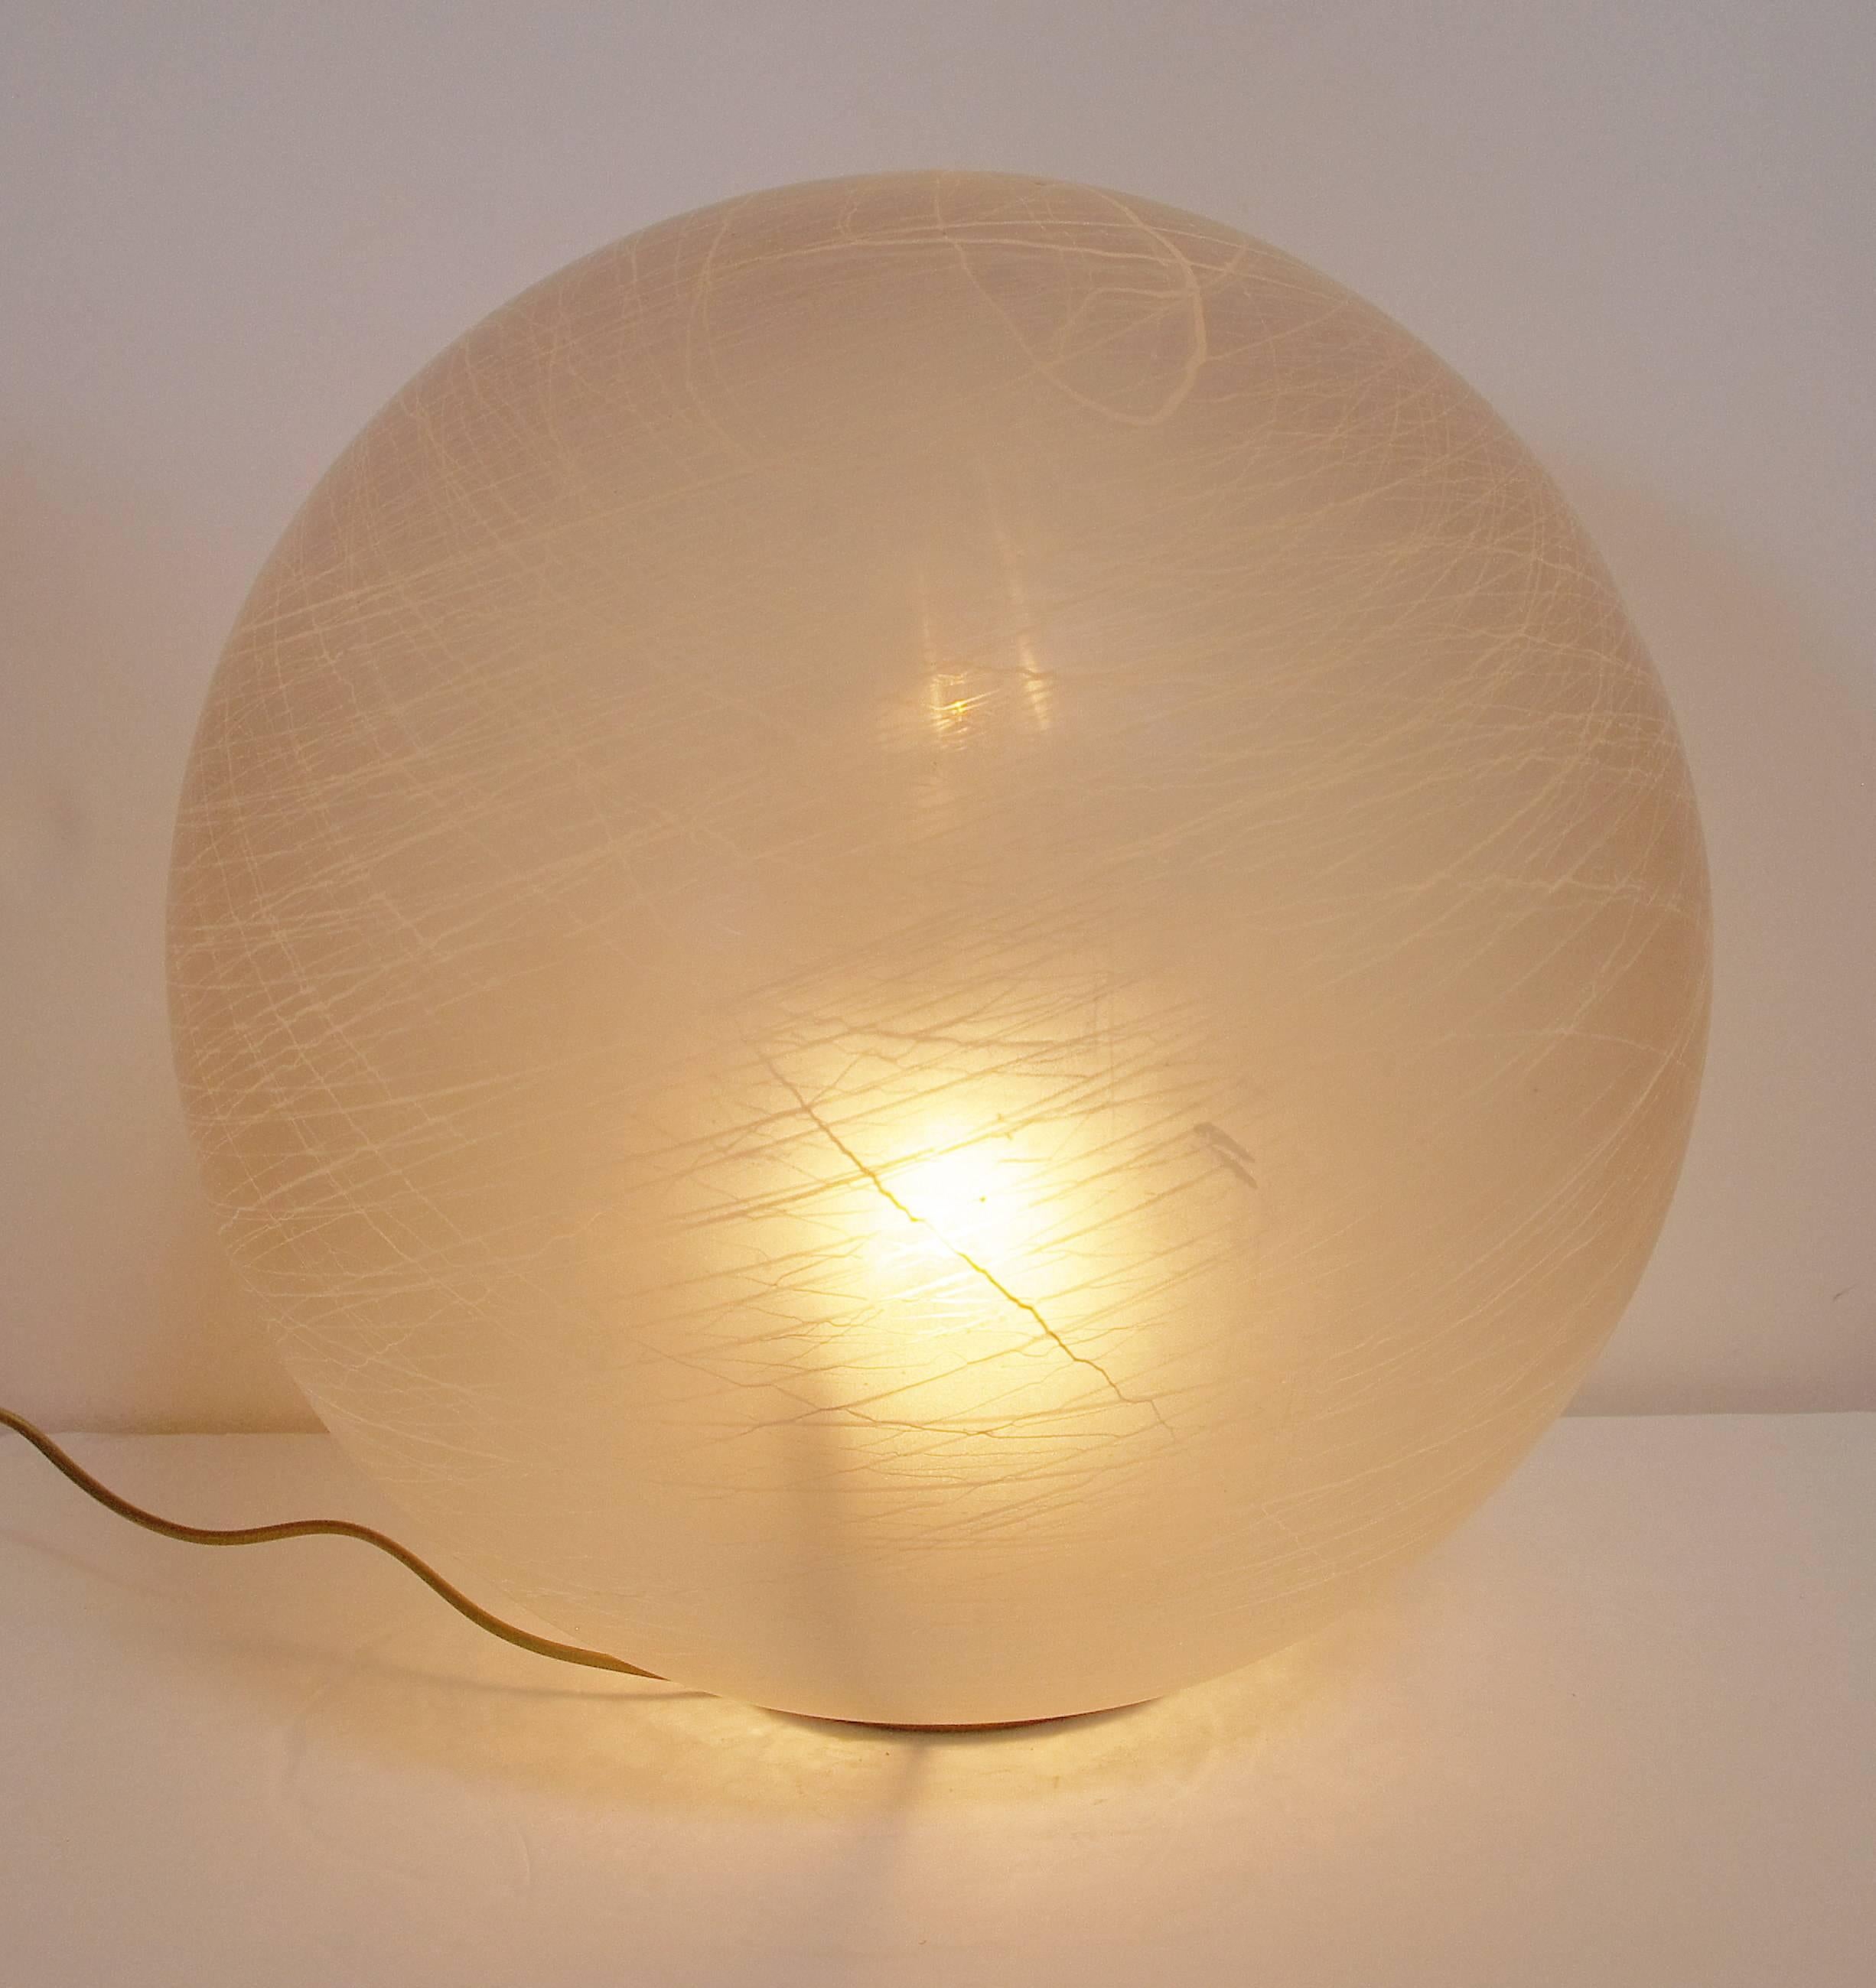 Vintage Italian floor lamp with frosted Murano glass globe and brass base / Made in Italy circa 1960's
1 light / E26 or E27 type / max 60W
Diameter: 18 inches / Height: 18 inches
1 in stock in Palm Springs ON FINAL CLEARANCE SALE for $749!!!
Order